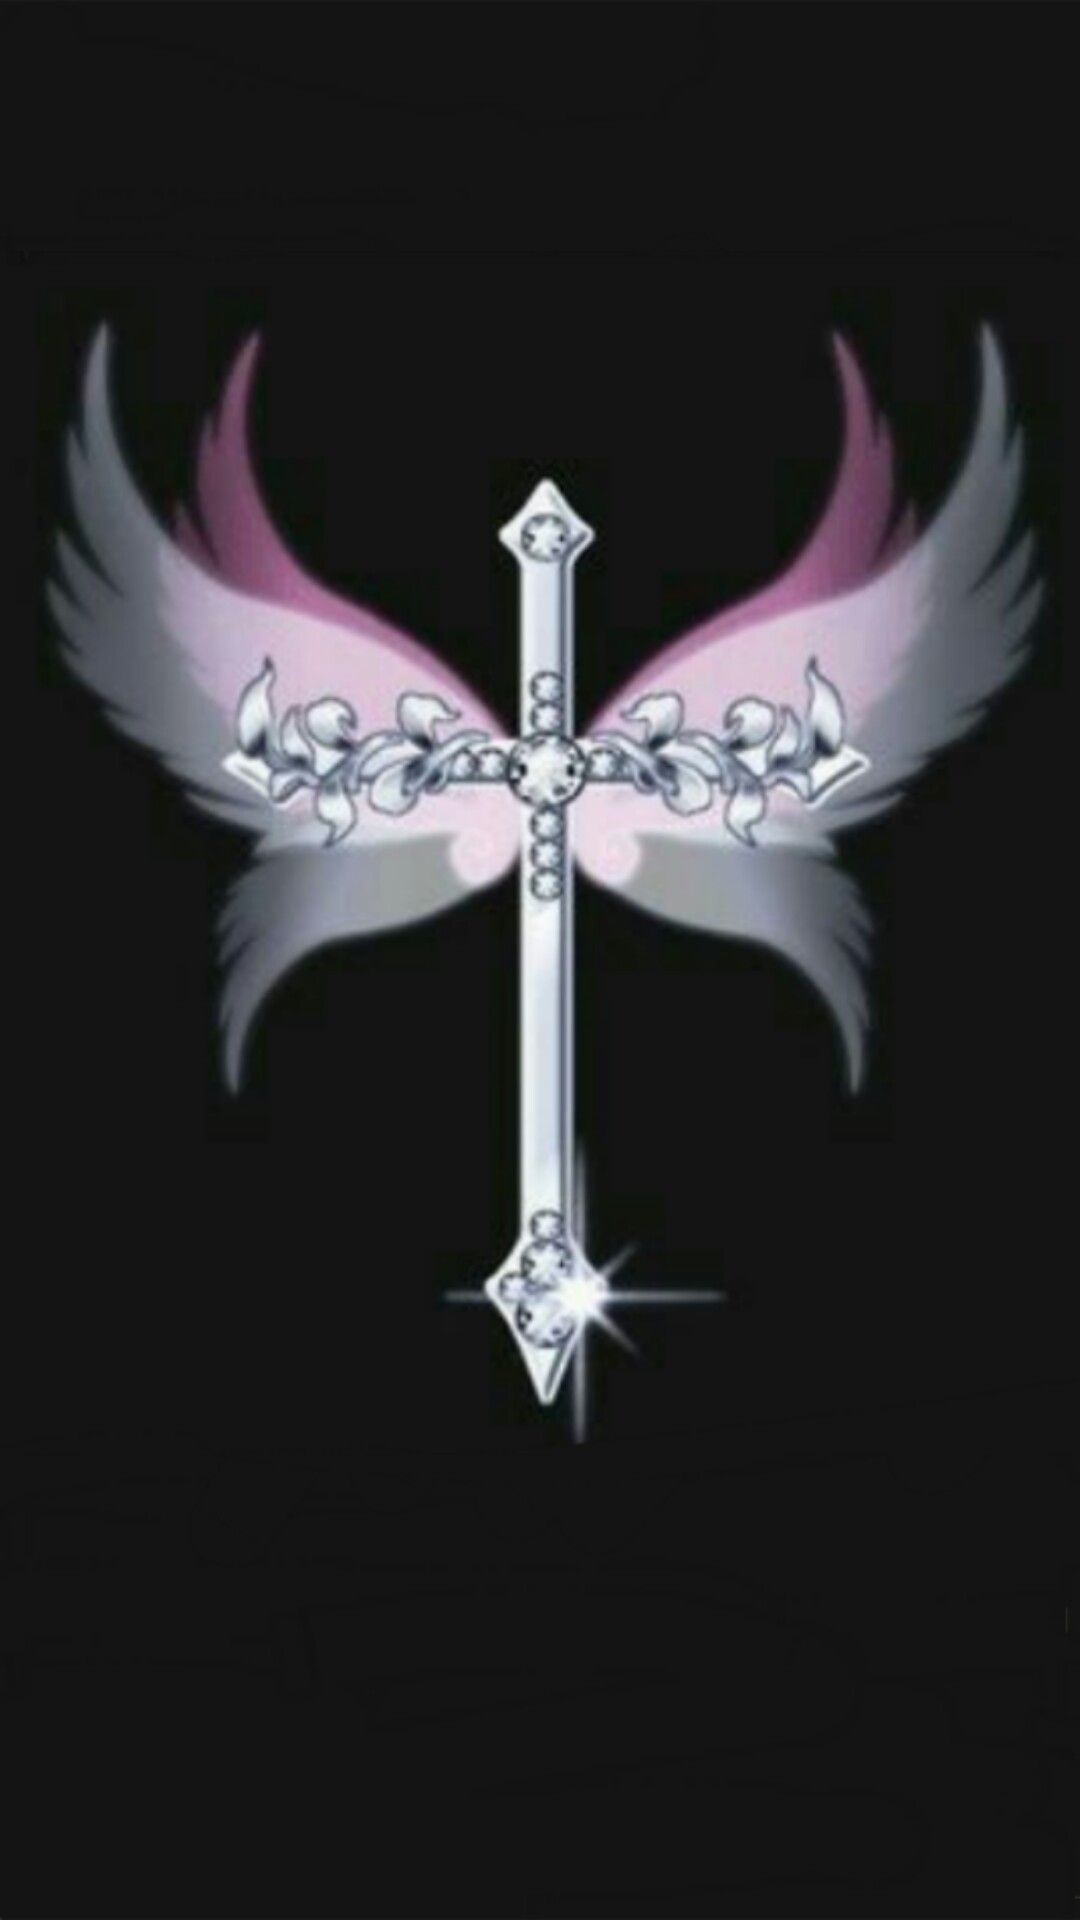 1080x1920 Silver Jewled Cross with pink & white wings Camo Wallpaper, Cross Wallpaper,  More Wallpaper